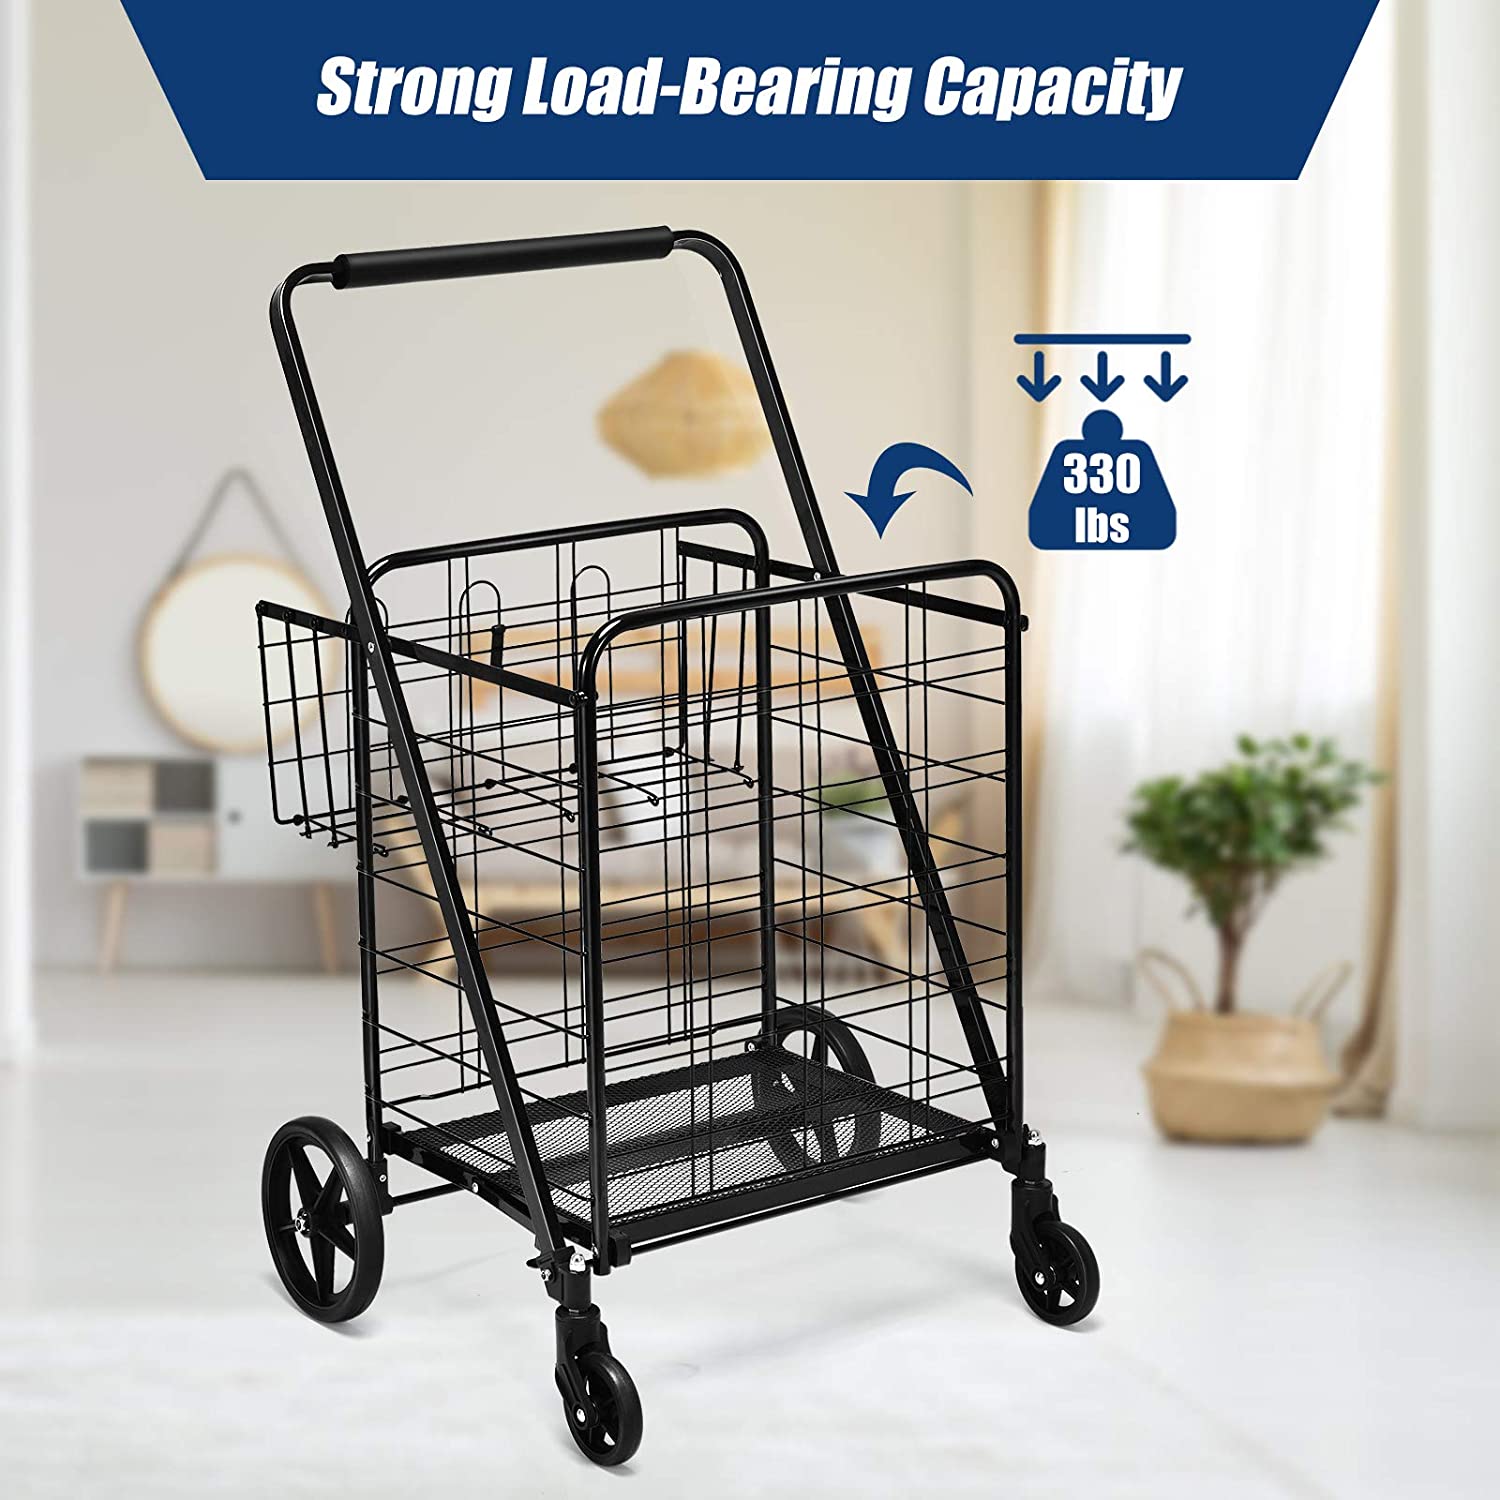 Chairliving Portable Jumbo Double Basket Utility Grocery Heavy Duty Folding Shopping Cart with 360° Rolling Swivel Wheels